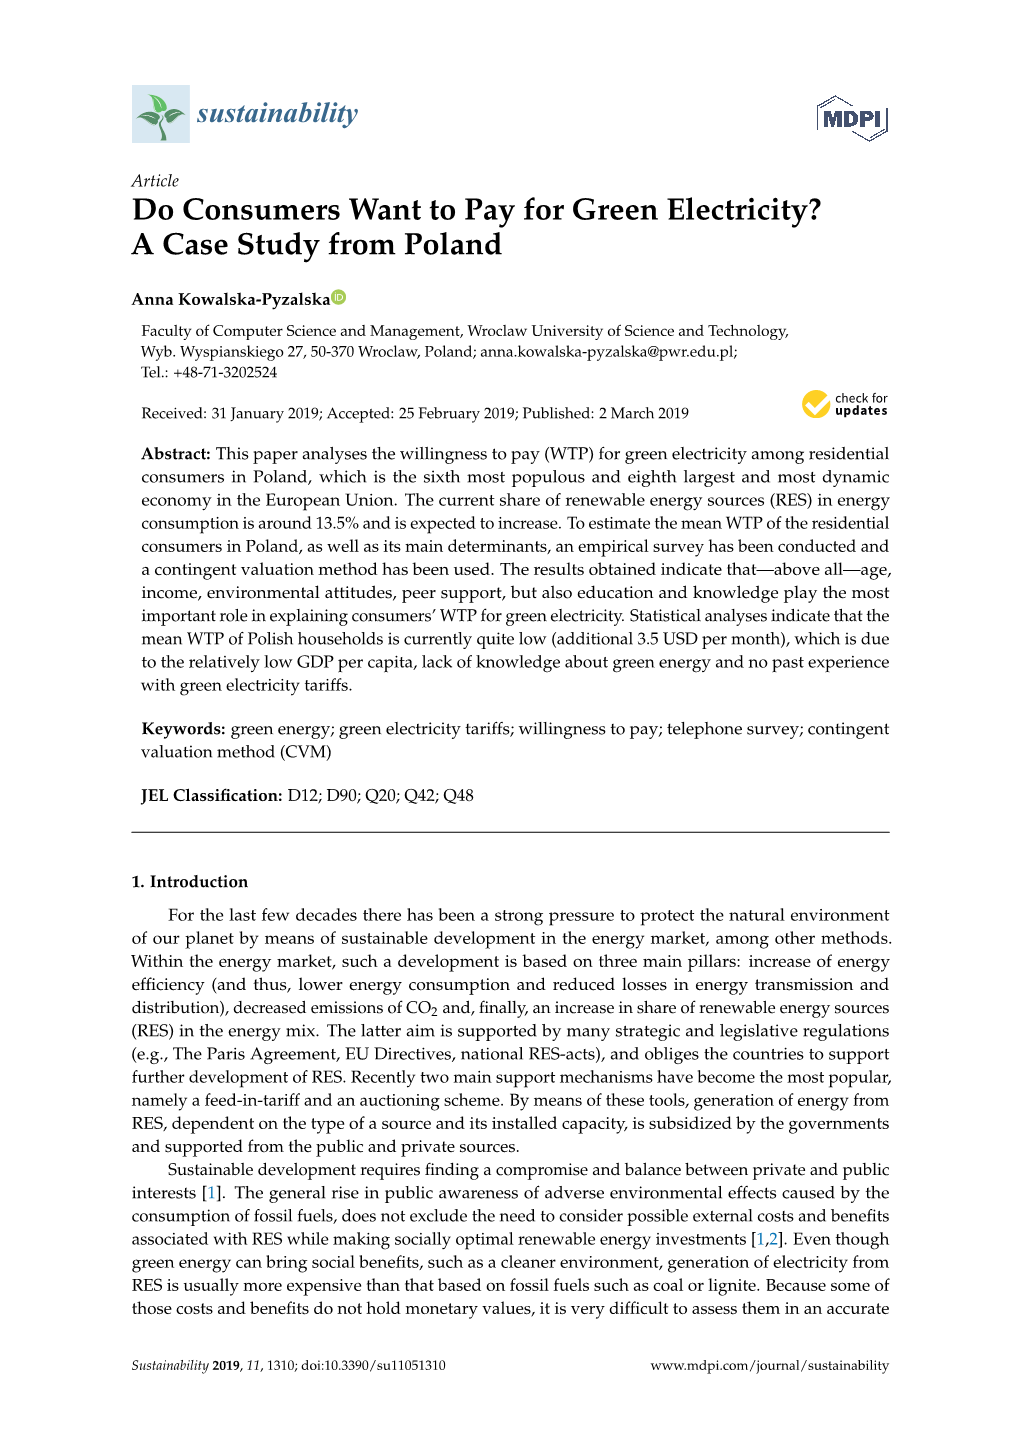 Do Consumers Want to Pay for Green Electricity? a Case Study from Poland